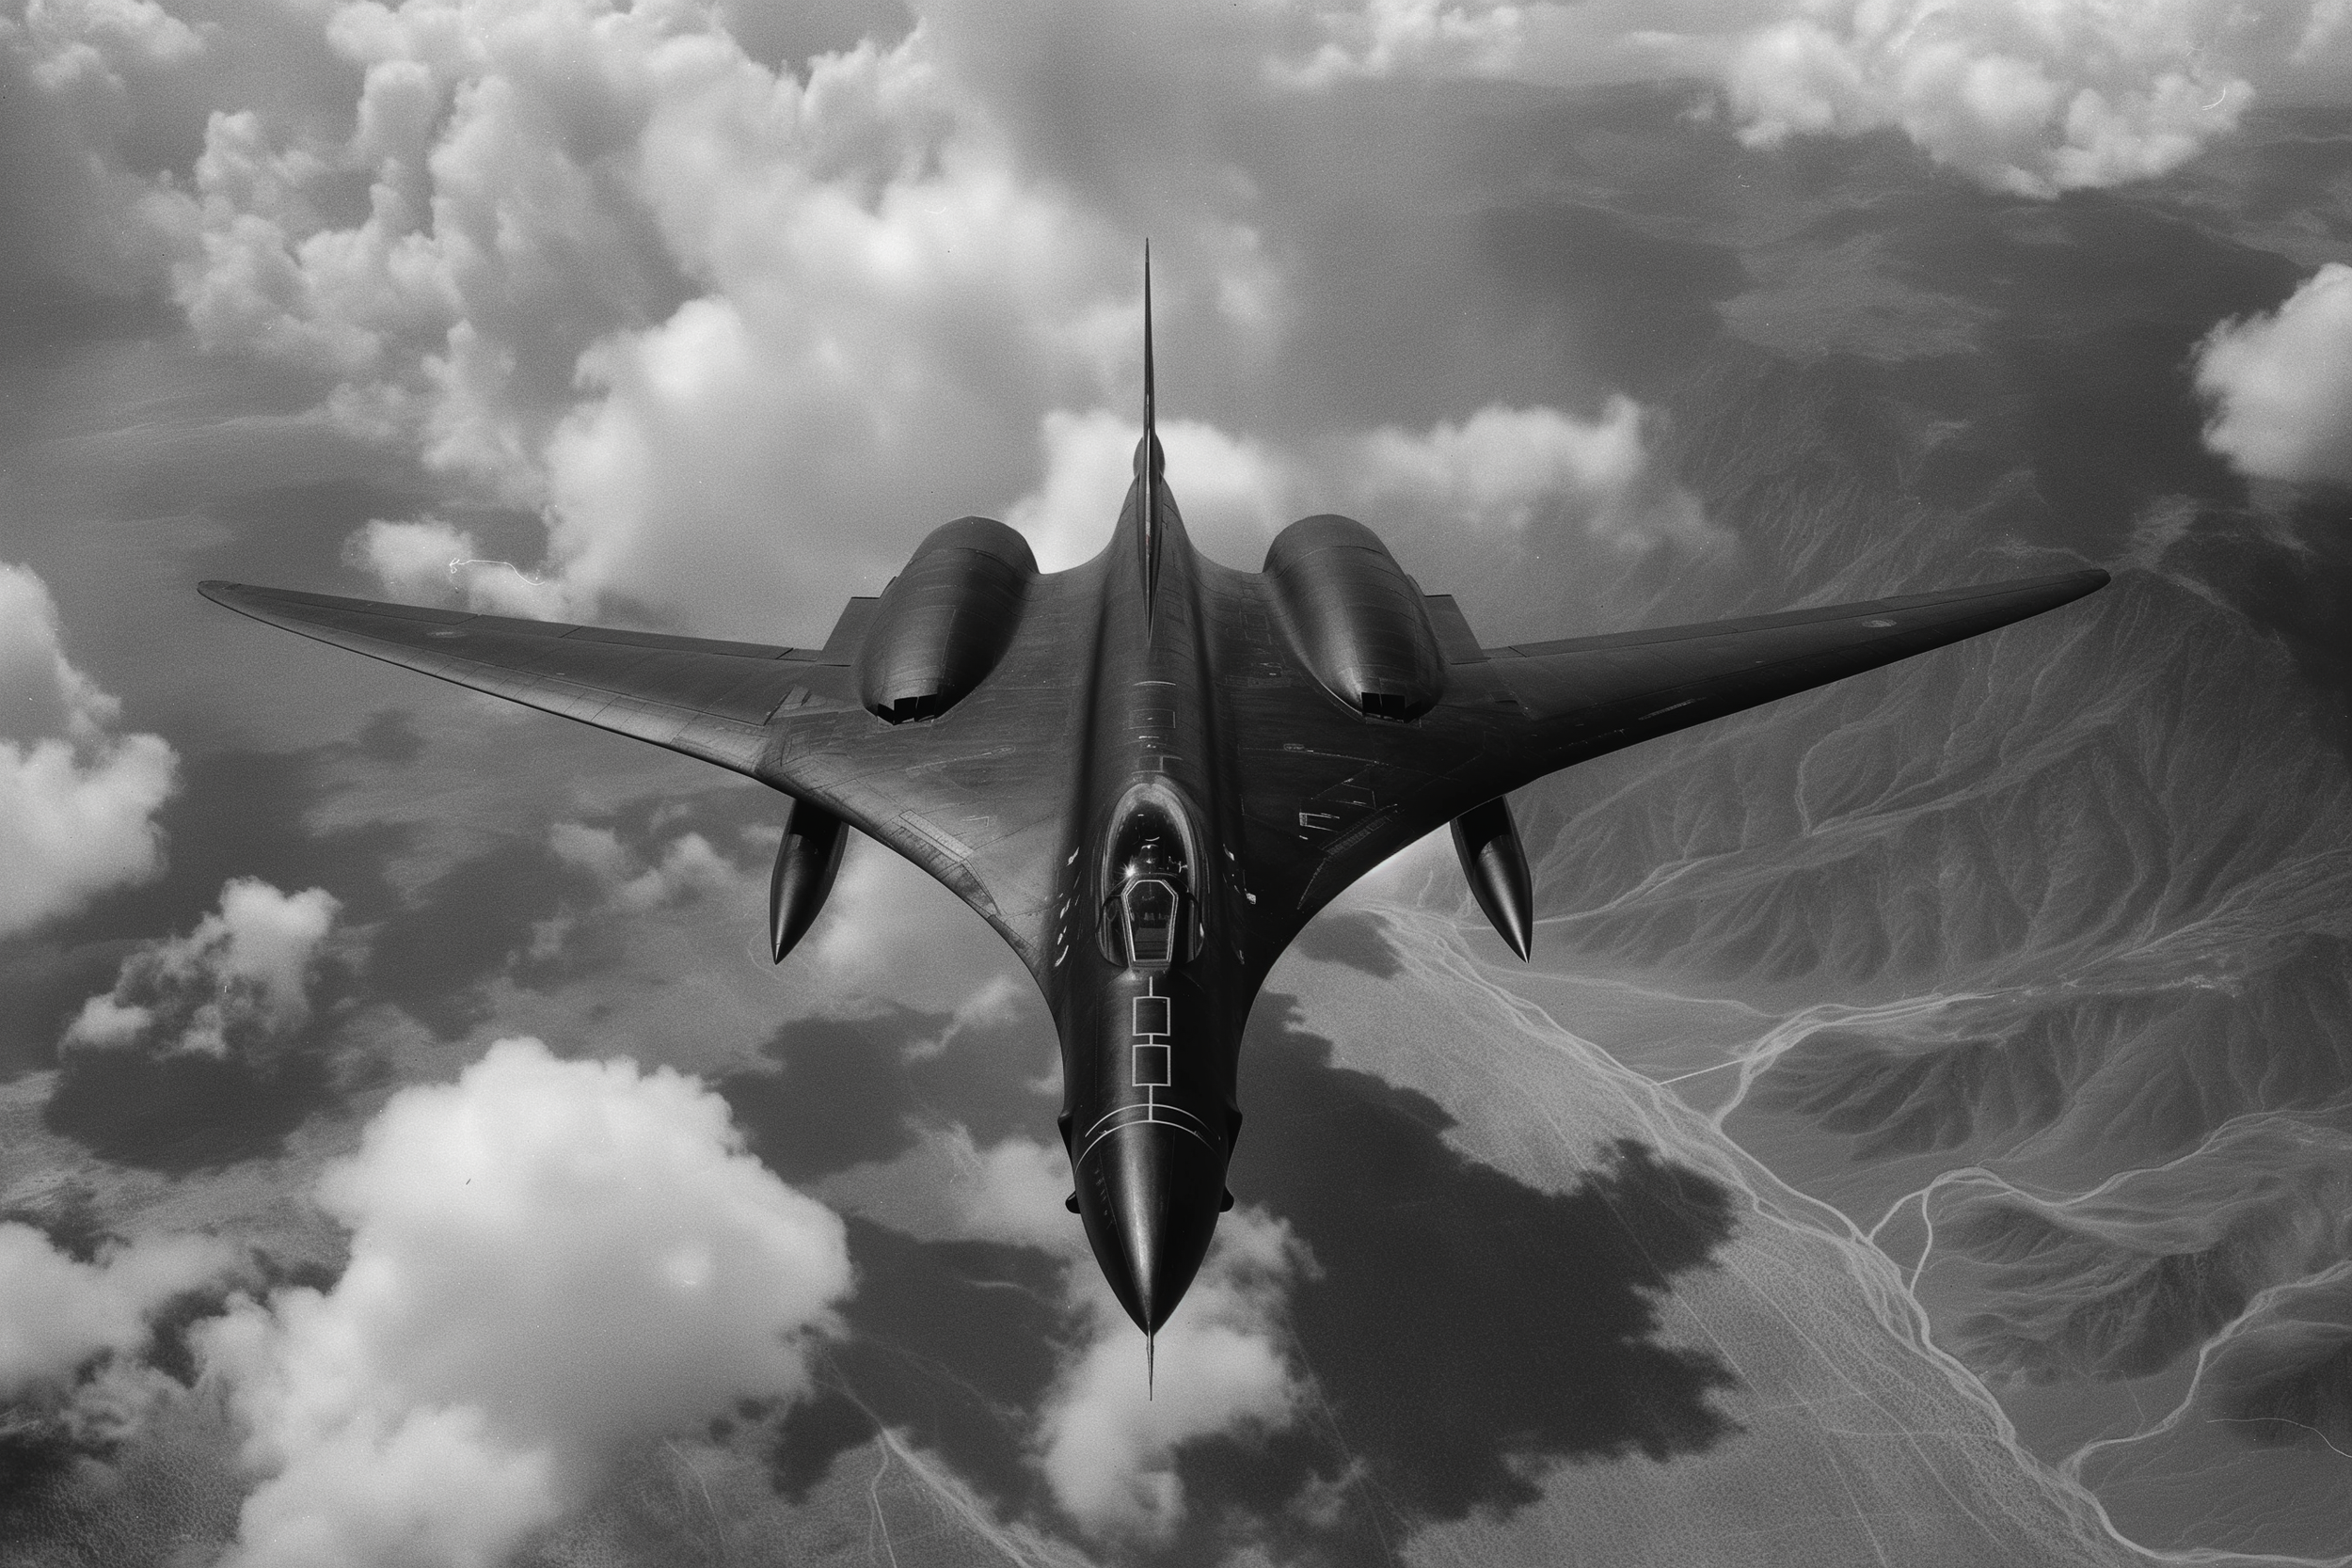 wrathcorp_haunting_images_of_aerial_war_advanced_military_tech__c66a132e-af8d-4a48-96d9-e6ff6e289590.png